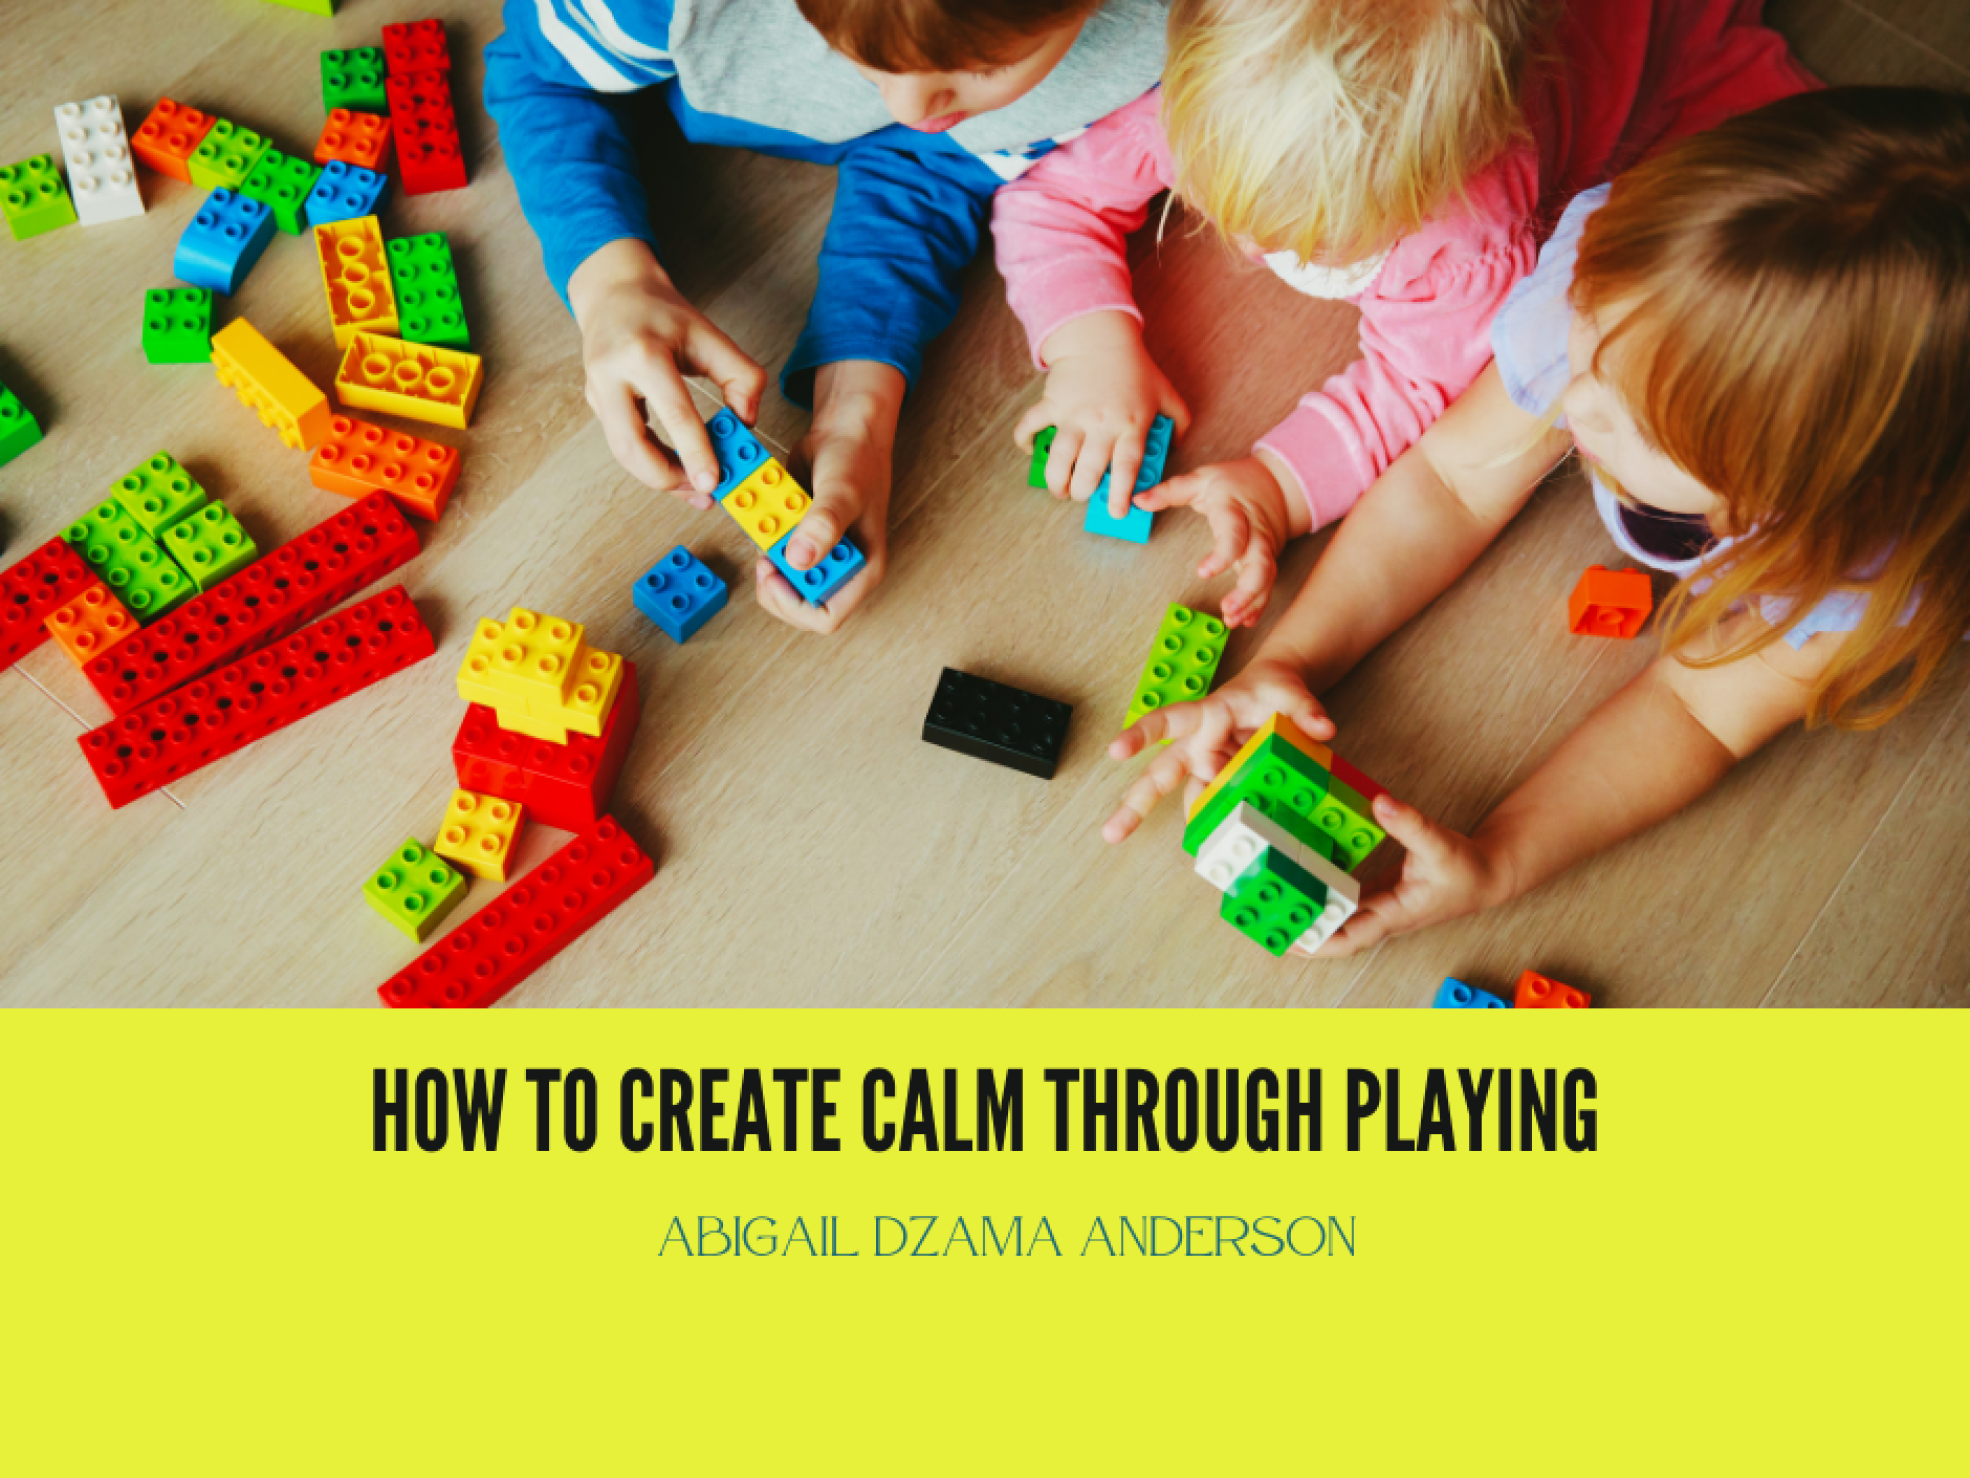 How to Create Calm Through Playing